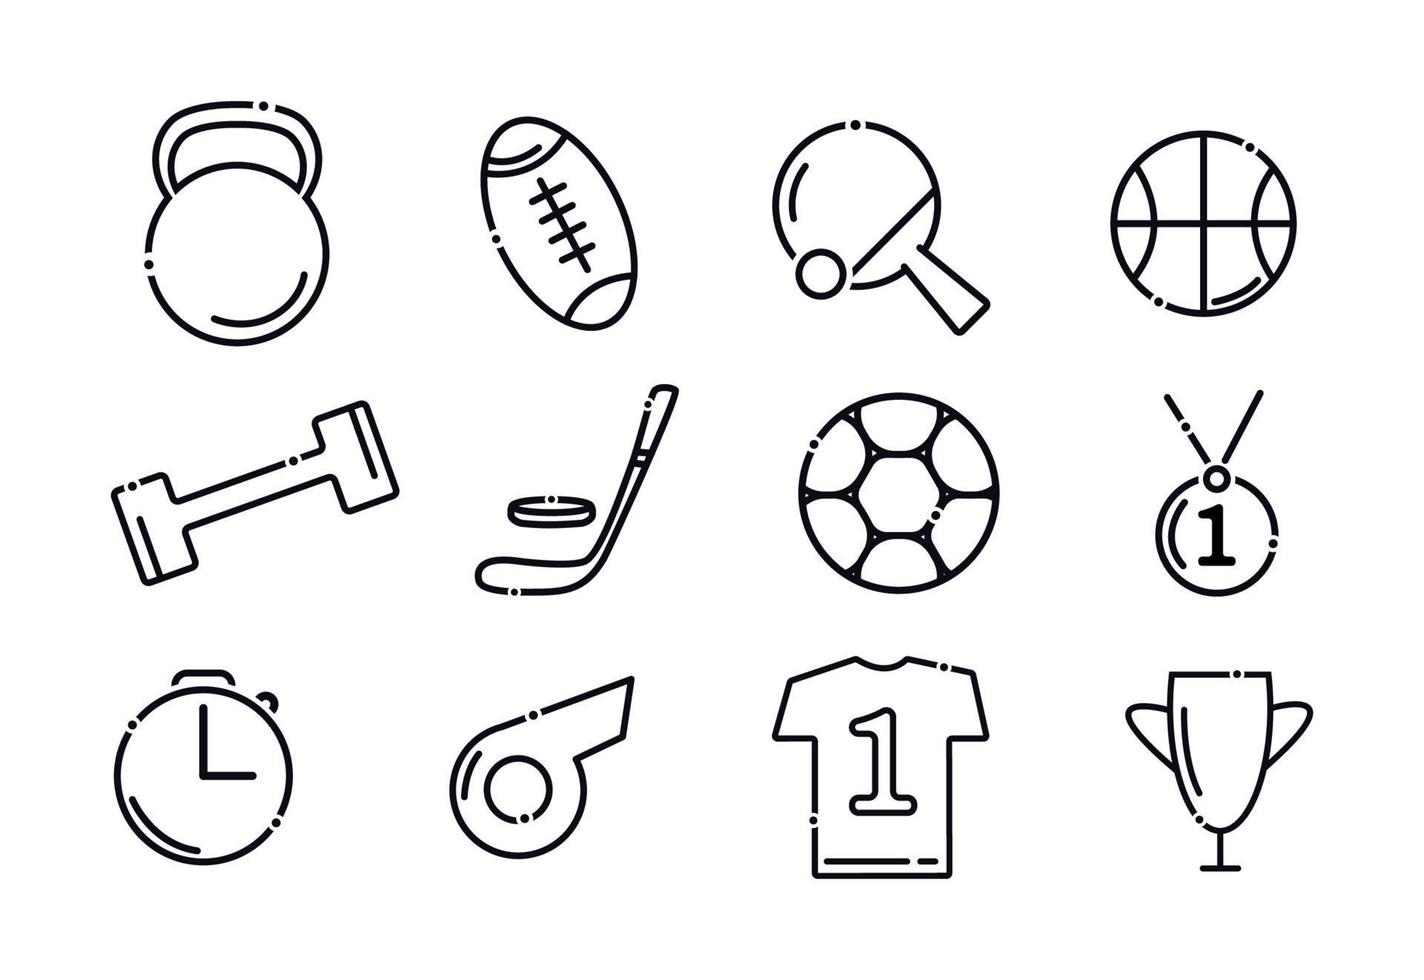 Sport icons set. Elements in the set kettlebell, soccer ball, rugby ball, basketball, dumbbell, hockey, club, puck, first place medal, whistle, t-shirt, cup. vector